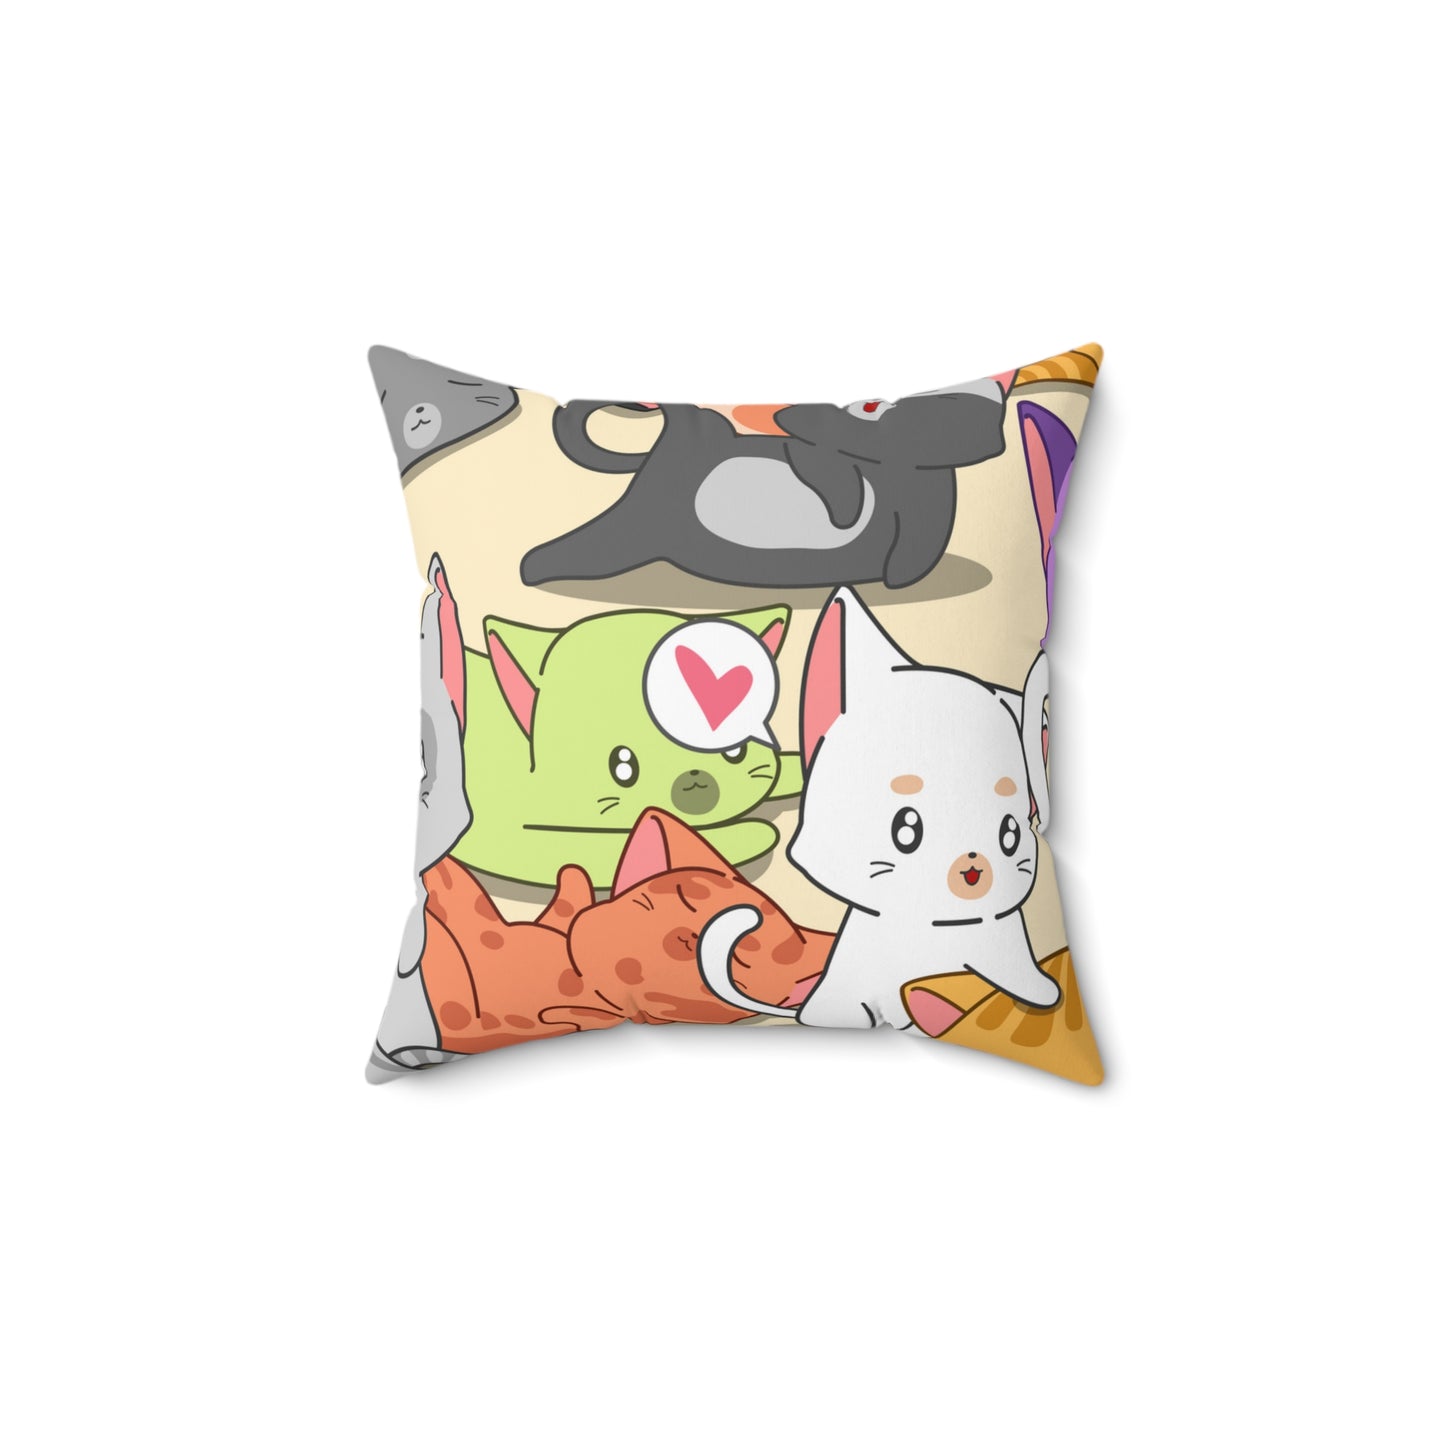 Kitty Playhouse Square Pillow